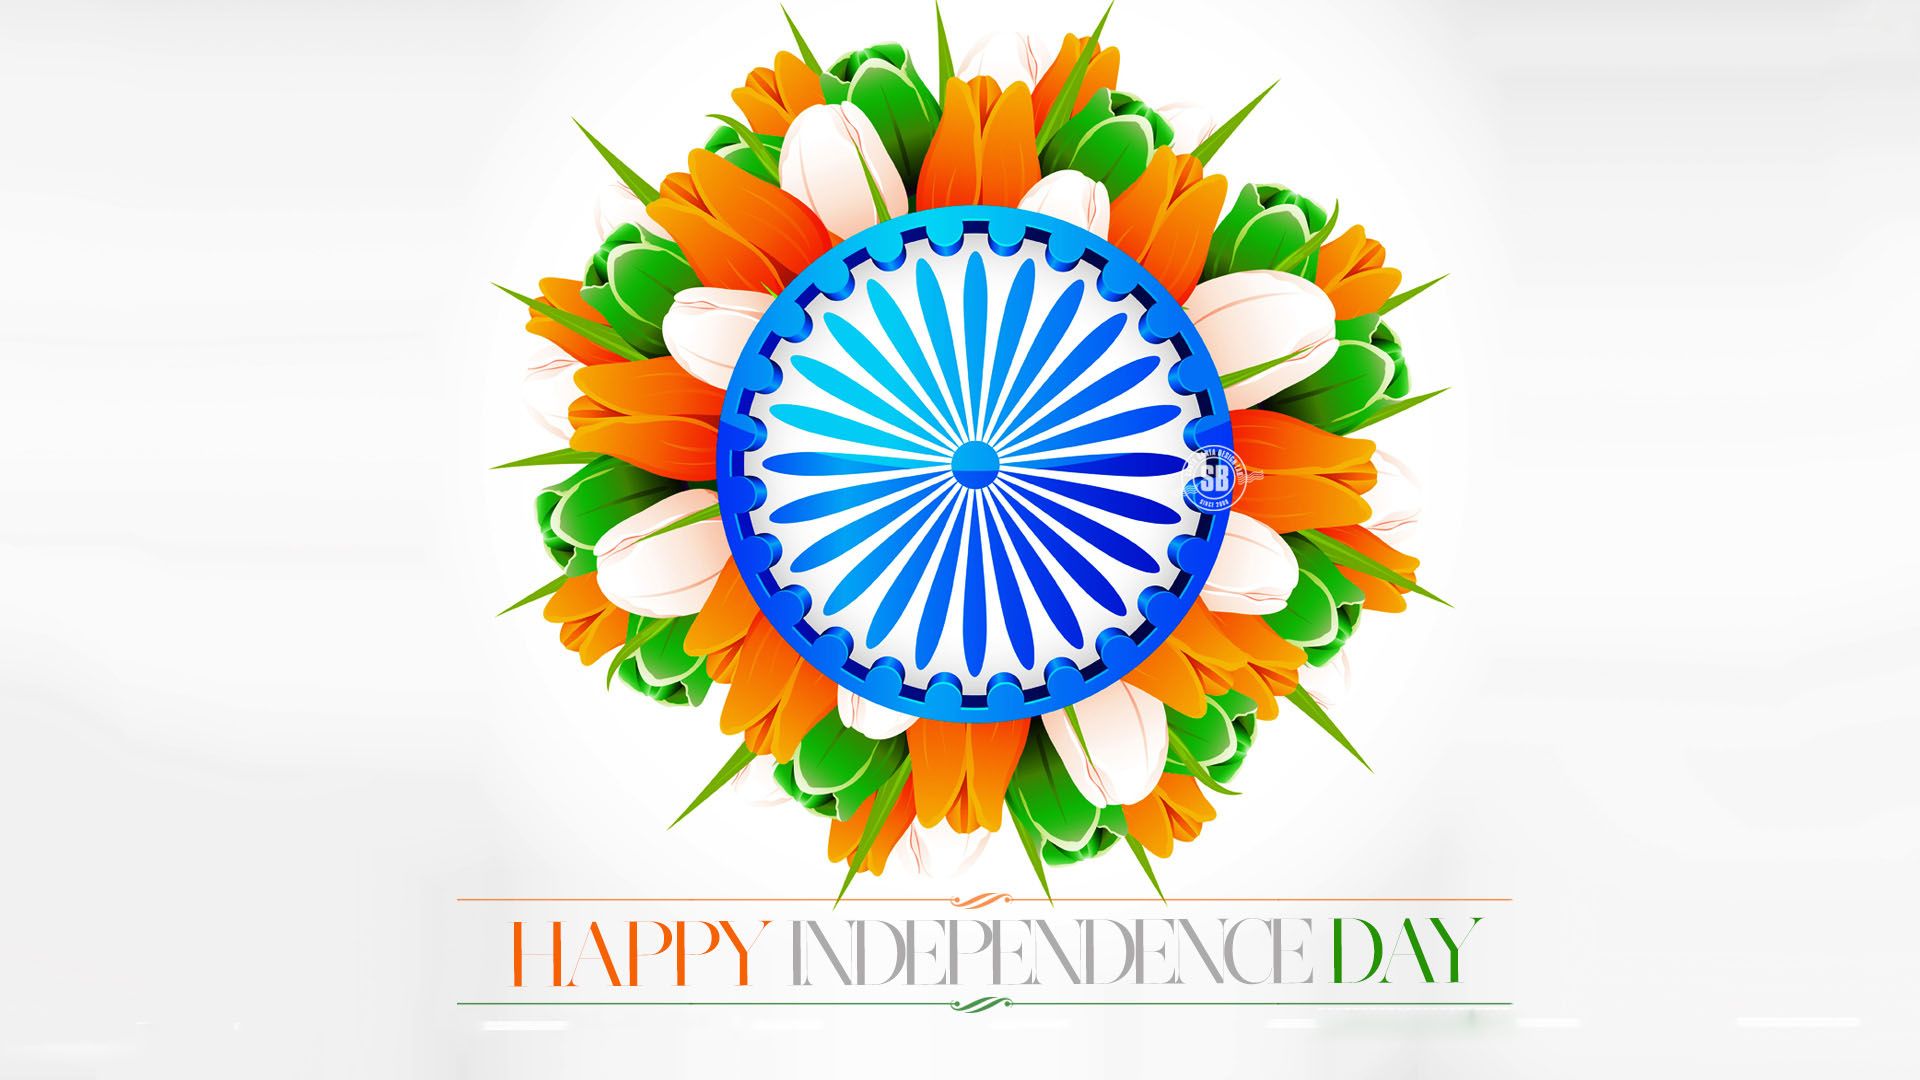 15th August Wallpapers HD Newhdpics Independence day wallpaper 1920x1080